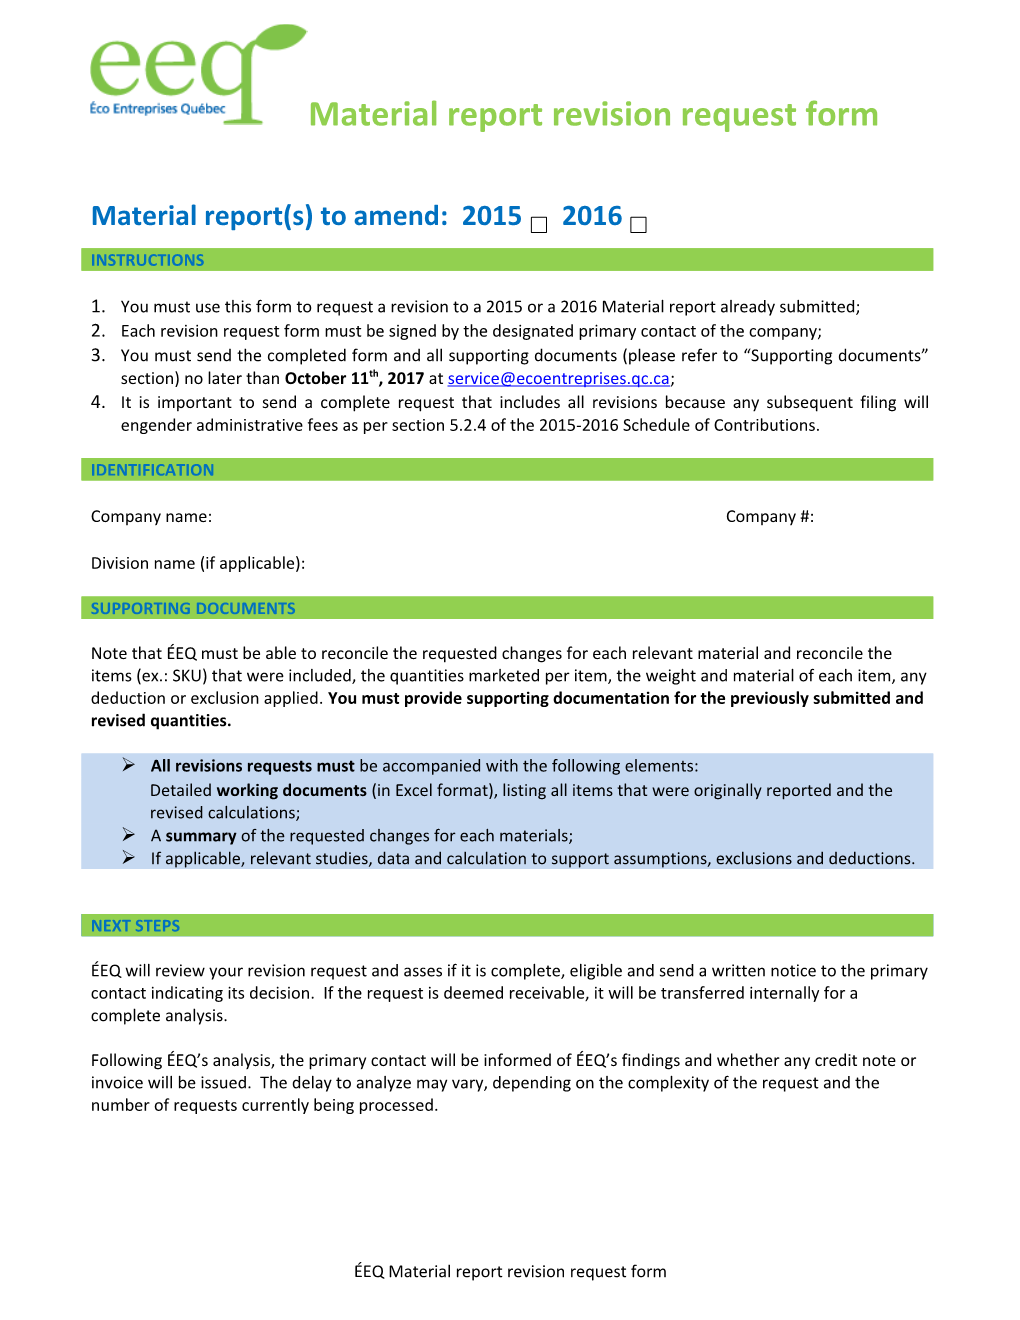 Material Report(S) to Amend: 2015 2016